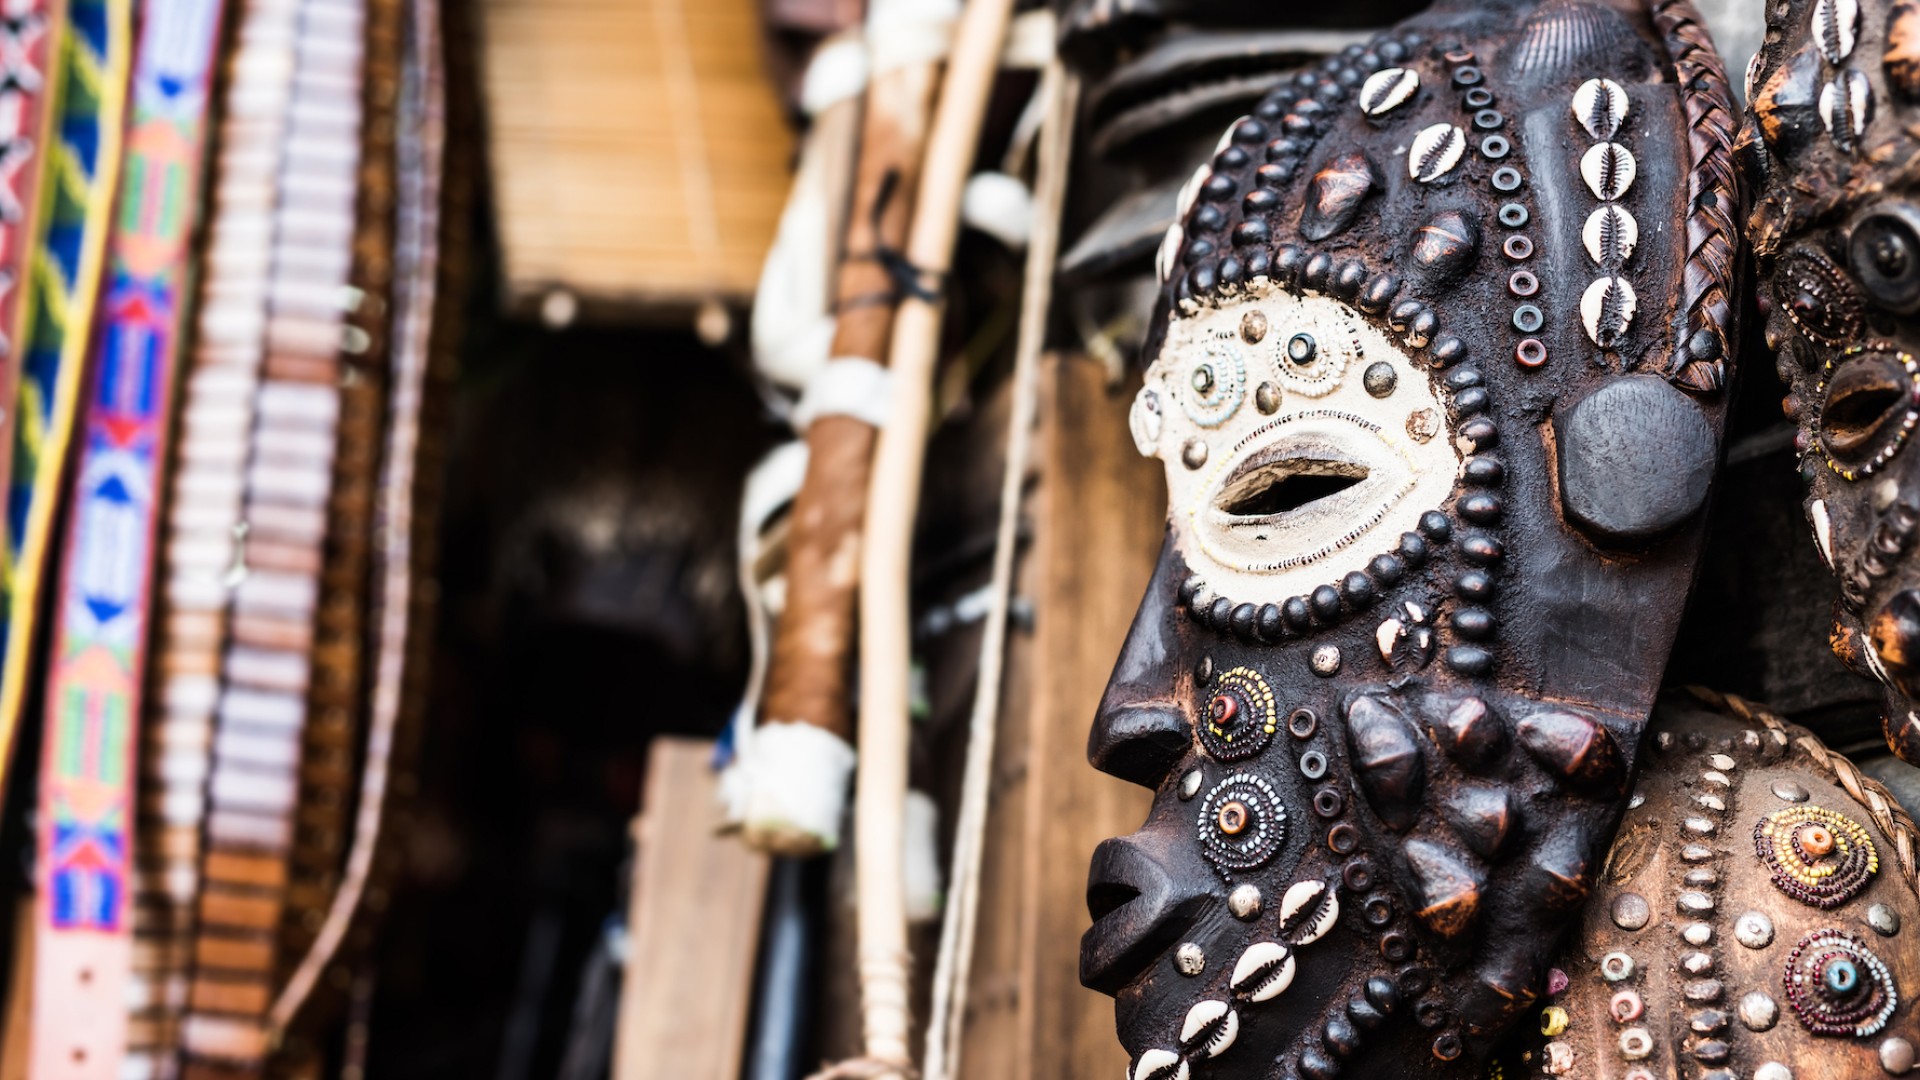 A detailed ceramic face mask next to various beaded necklaces of traditional style in Tanzania